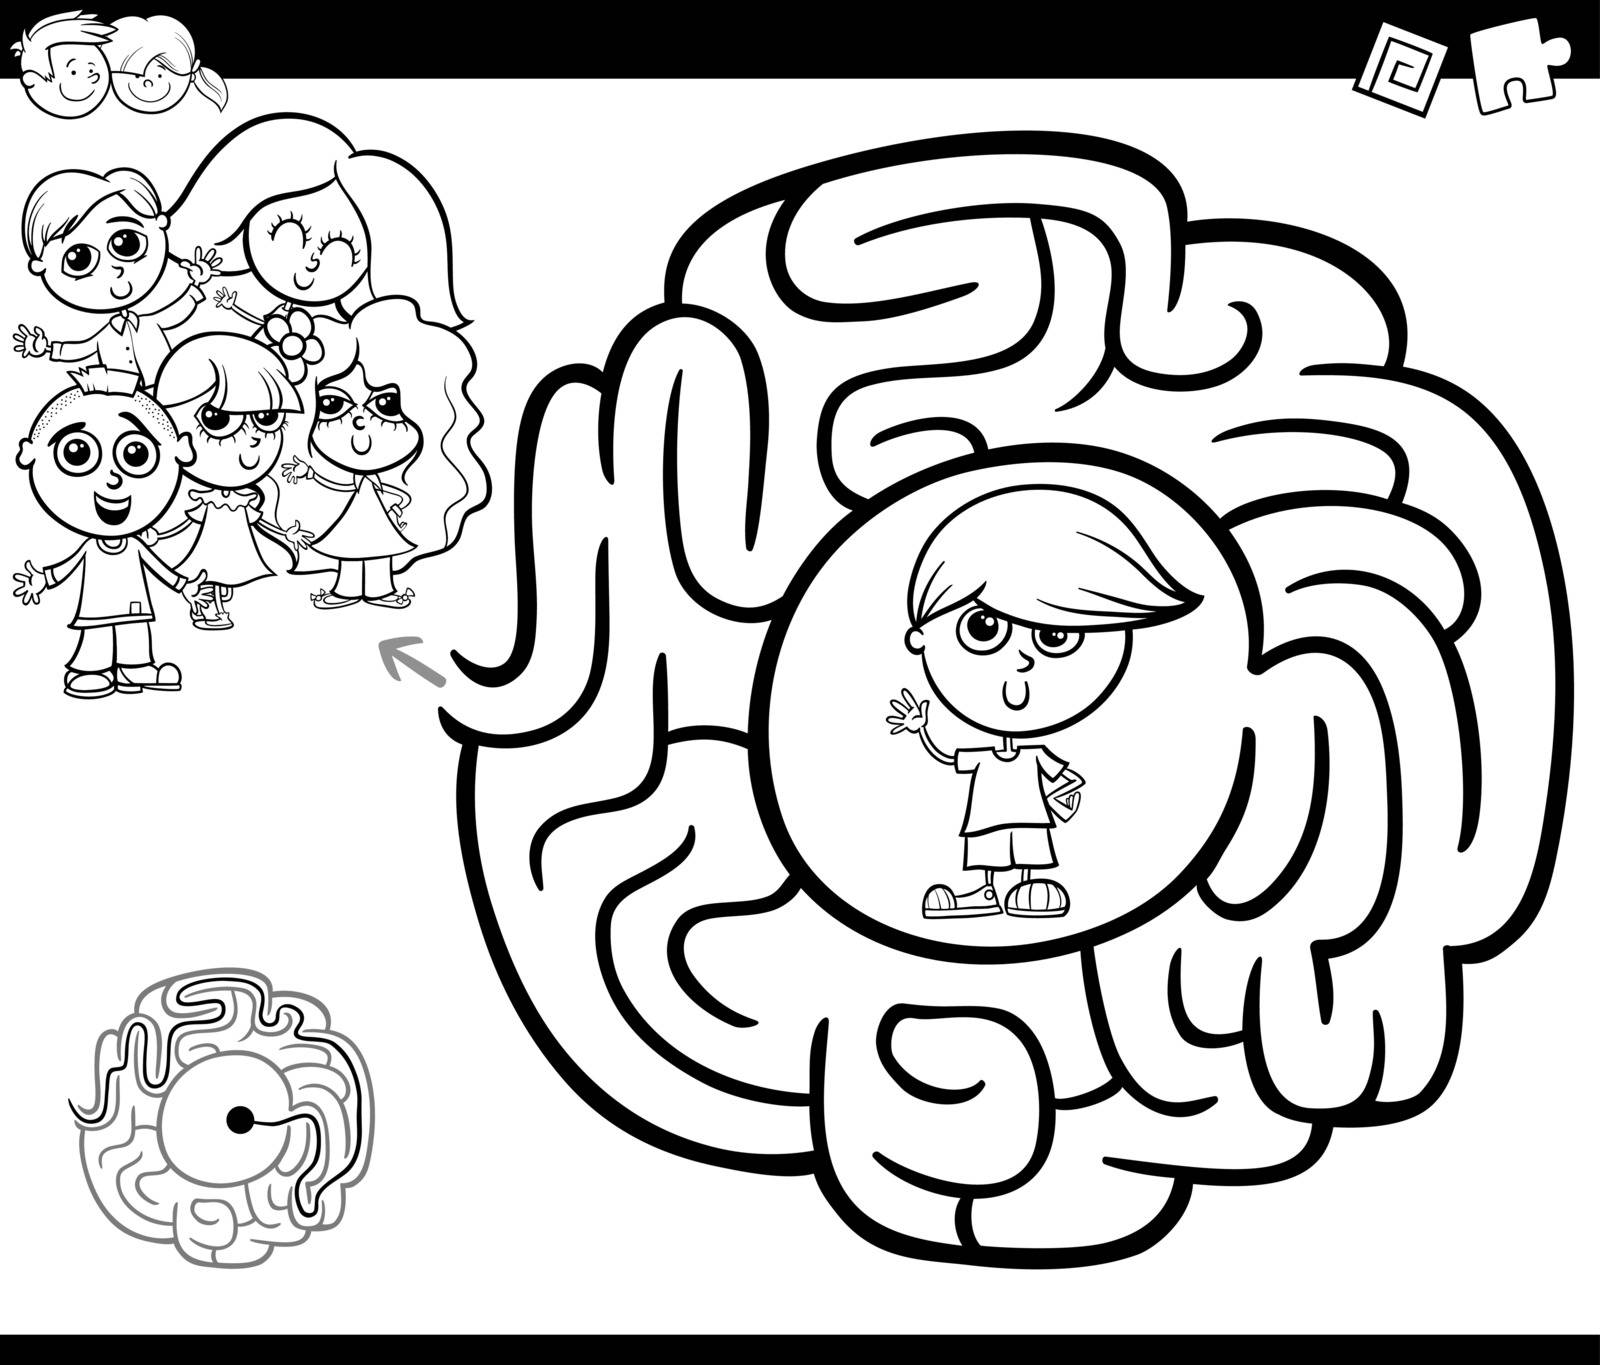 Black and White Cartoon Illustration of Education Maze or Labyrinth Game for Children with Kid Characters Coloring Page